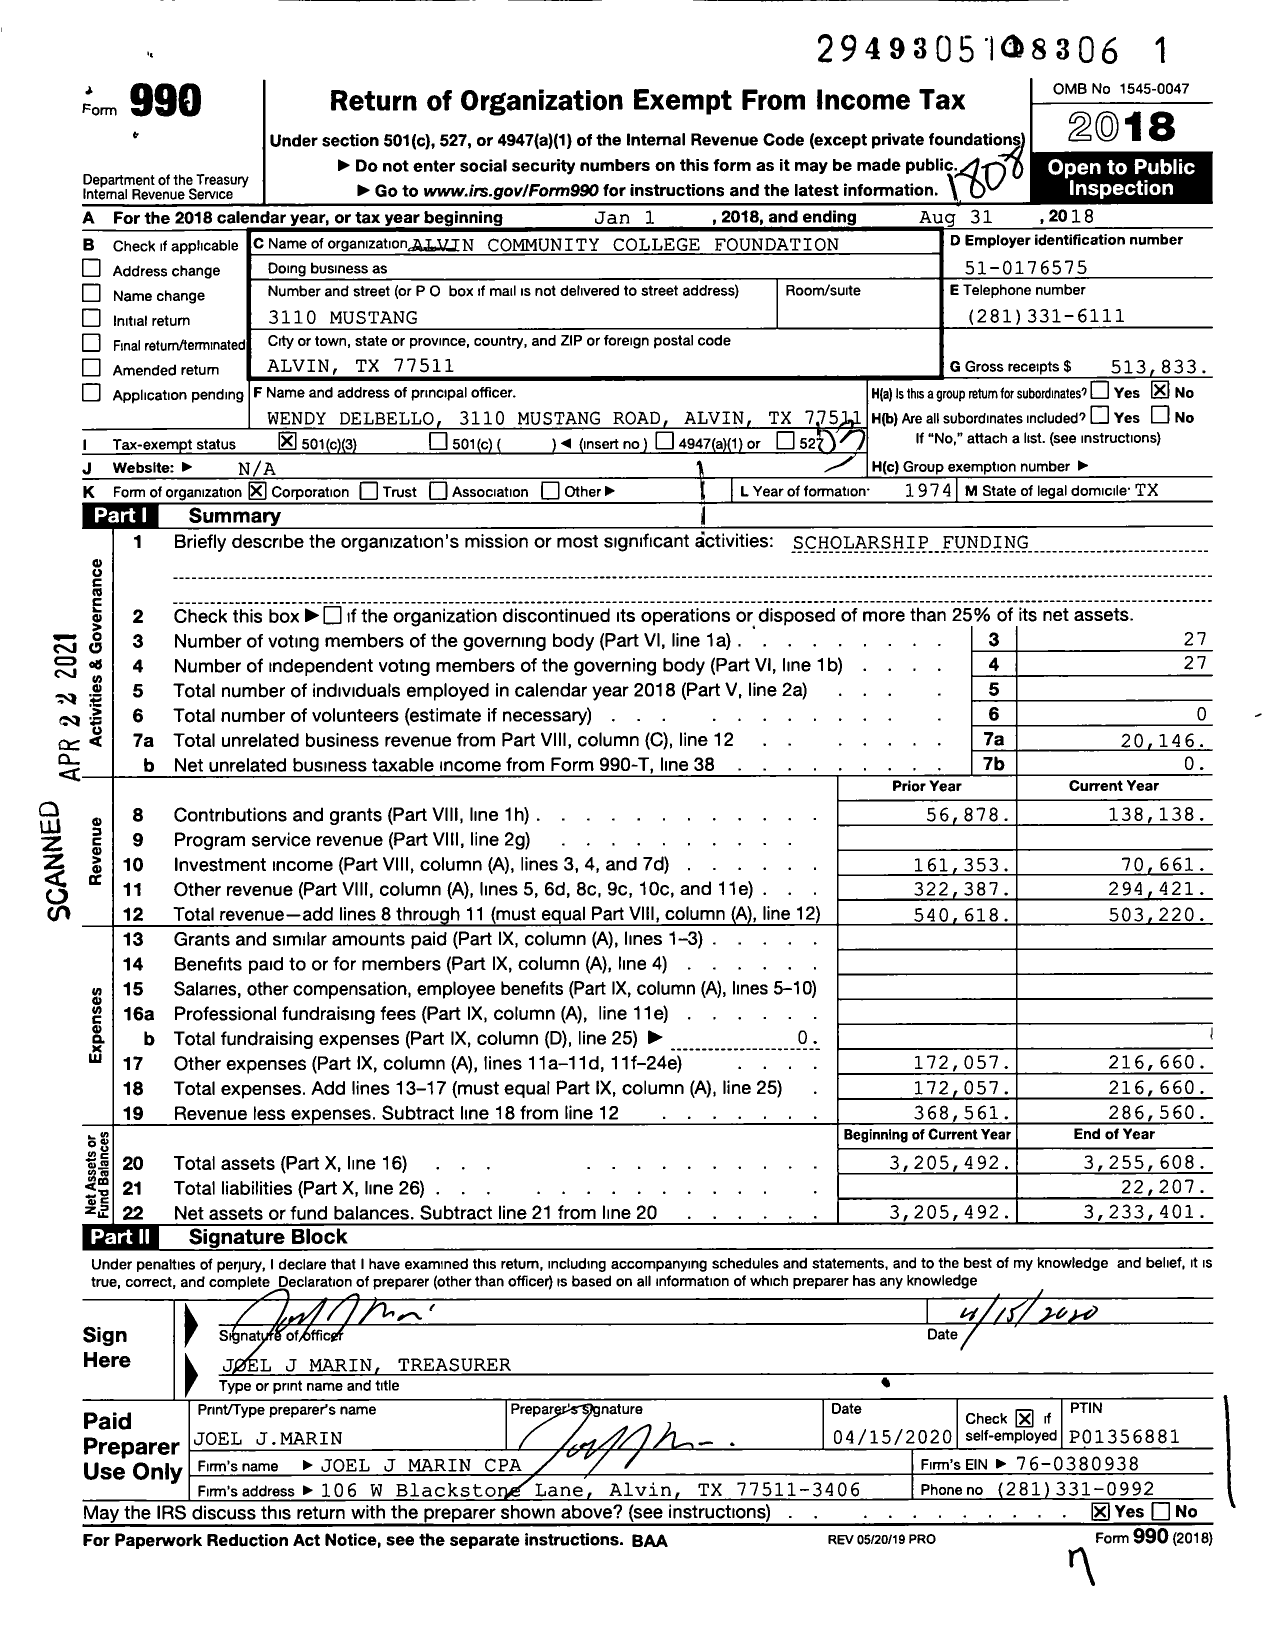 Image of first page of 2017 Form 990 for Alvin Community College Foundation